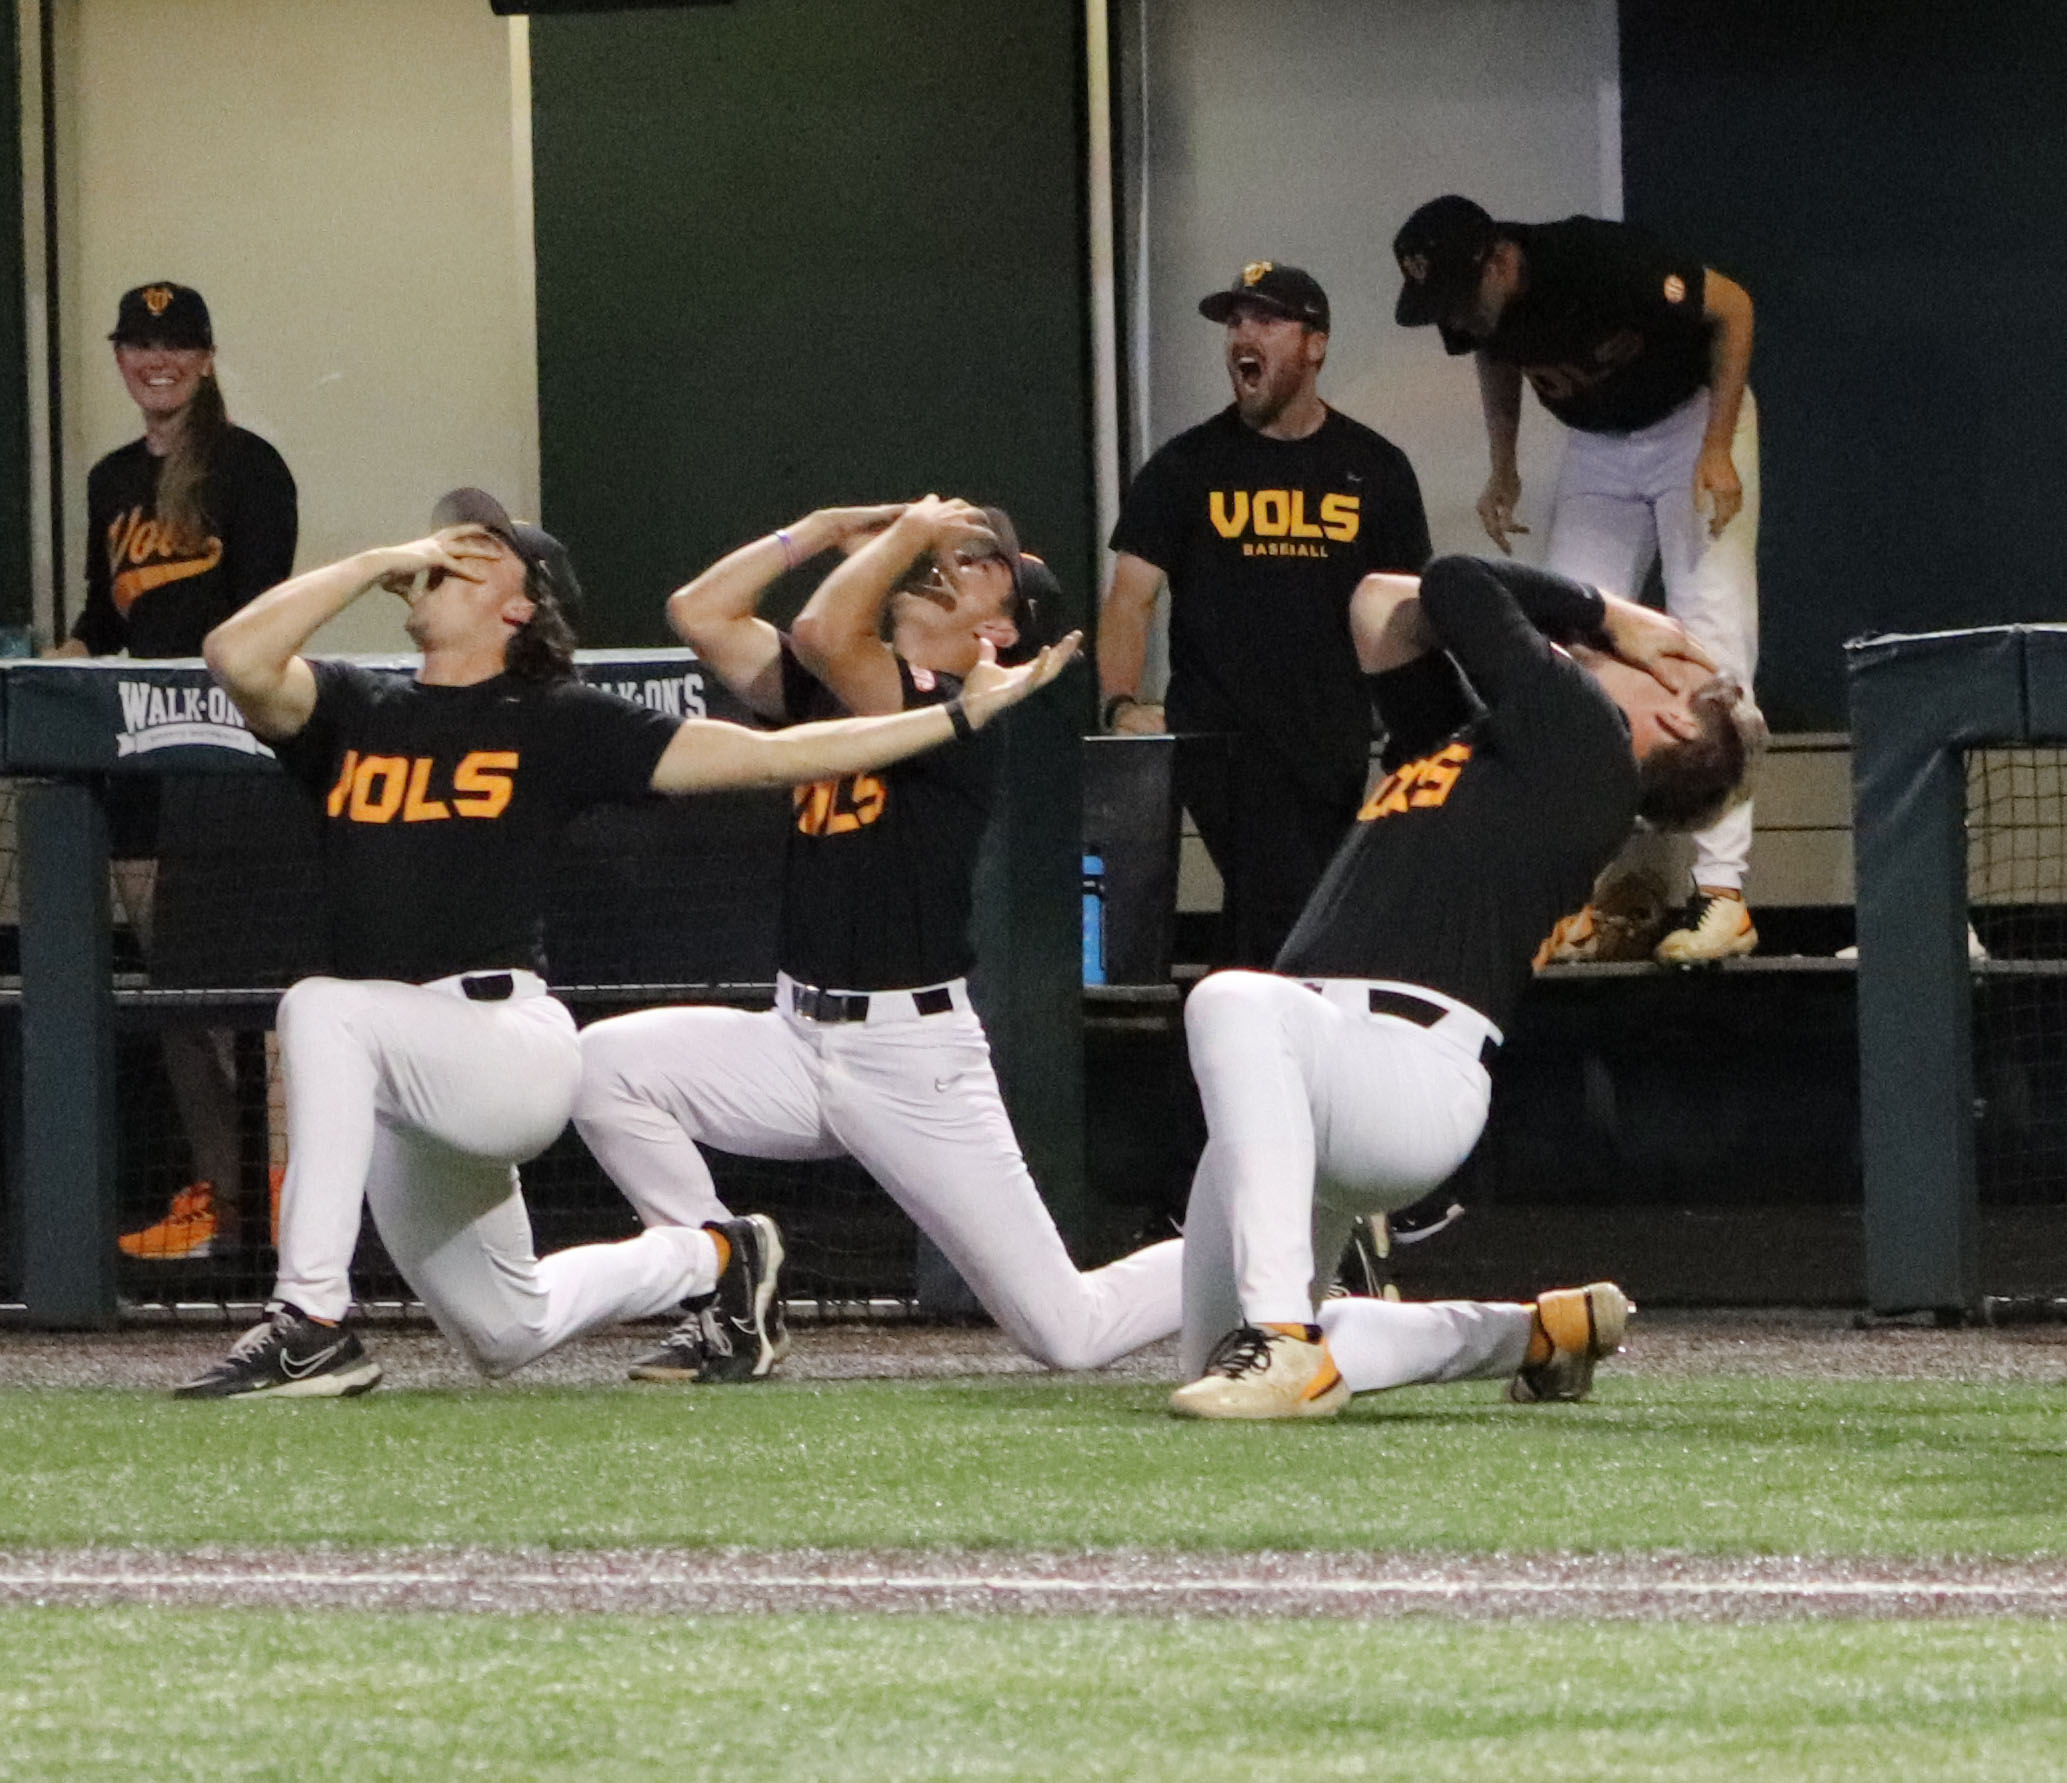 PHOTO GALLERY: Knoxville Regional – Tennessee Baseball Games